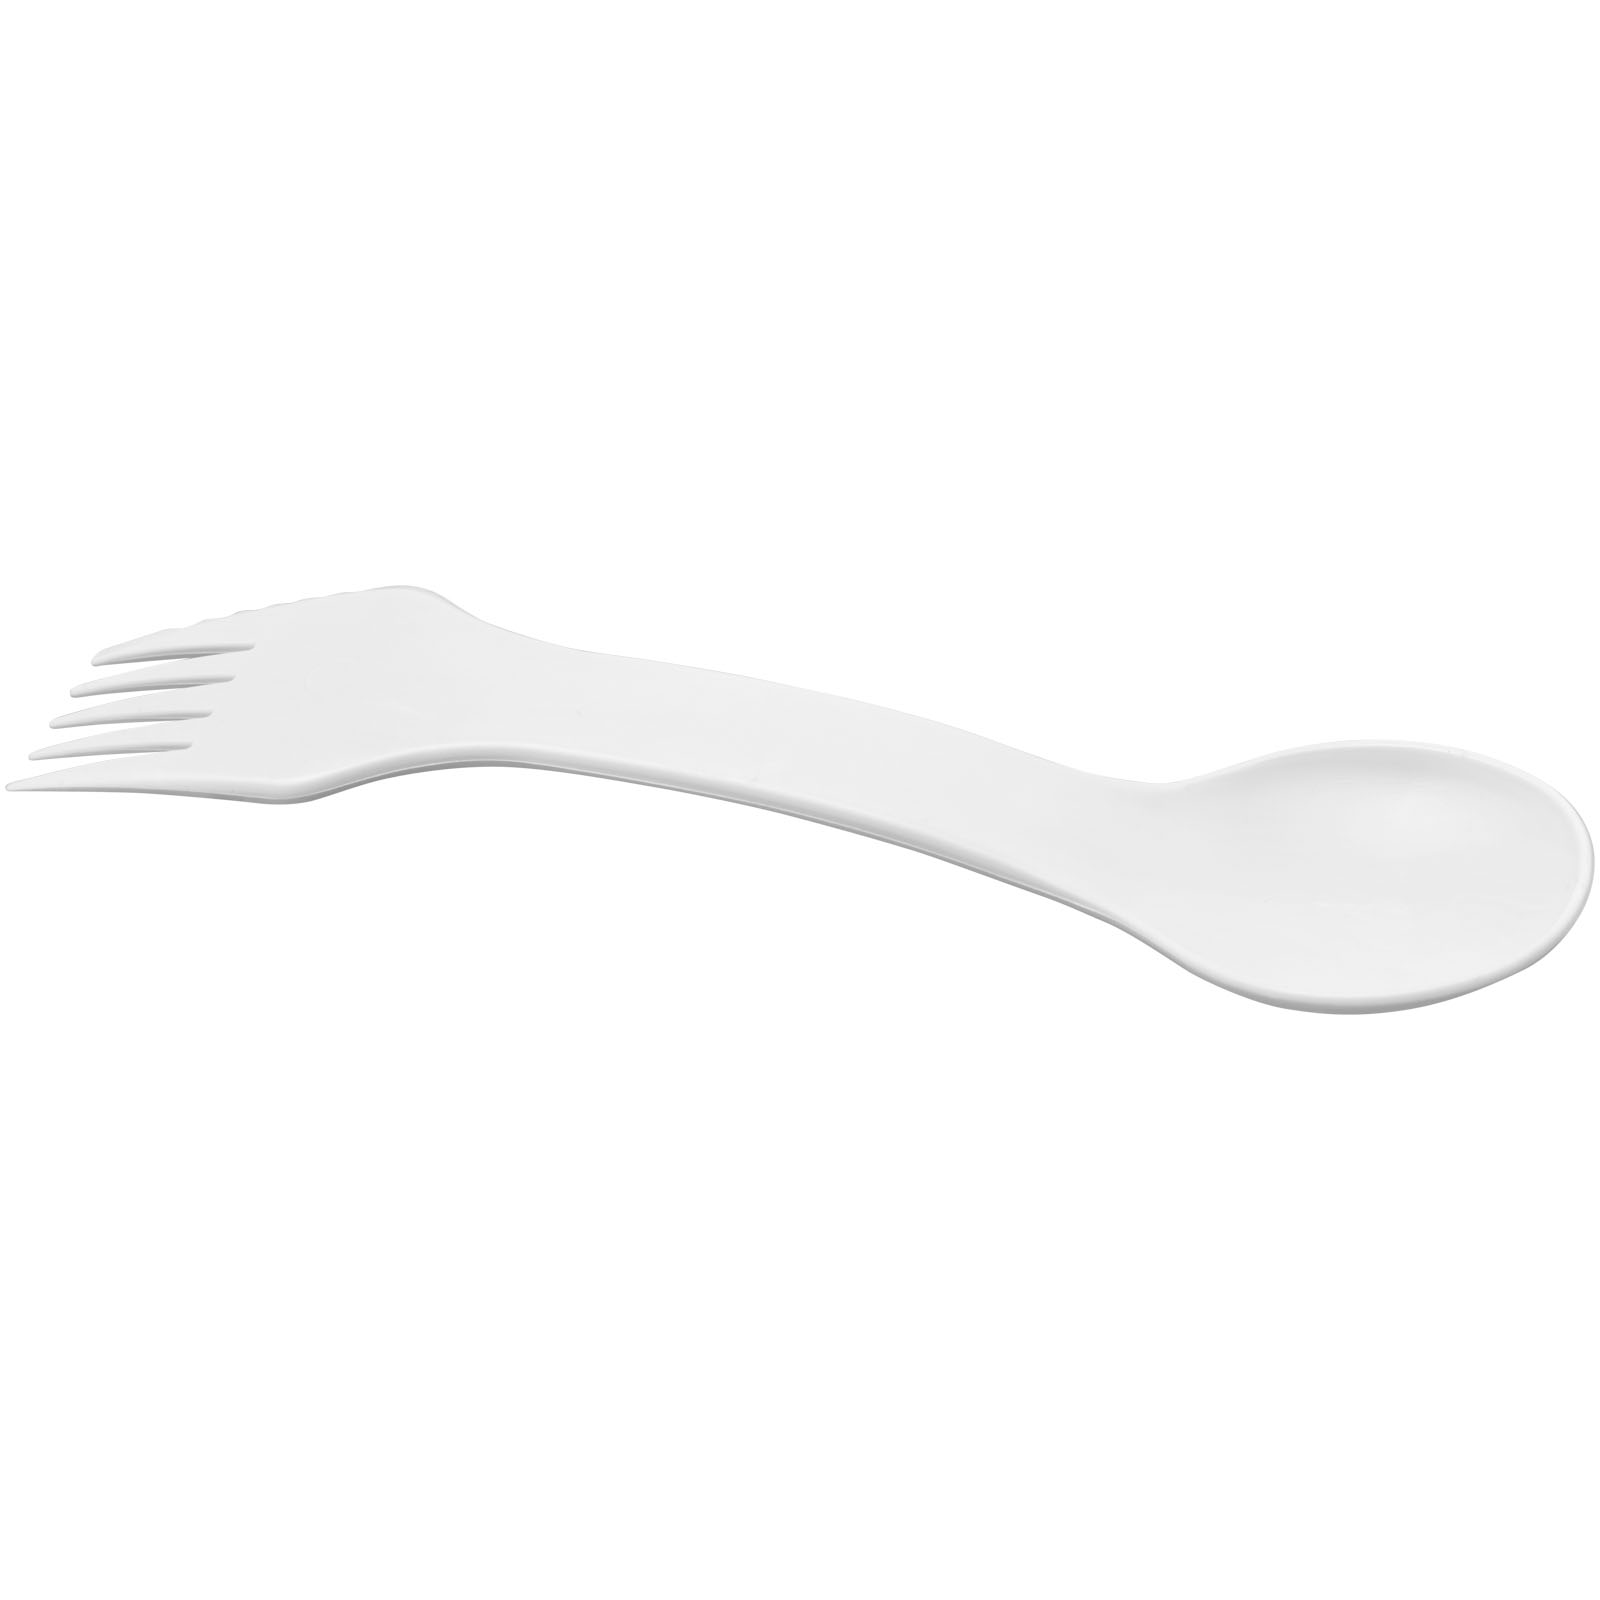 Advertising Picnic Accessories - Epsy Pure 3-in-1 spoon, fork and knife - 0